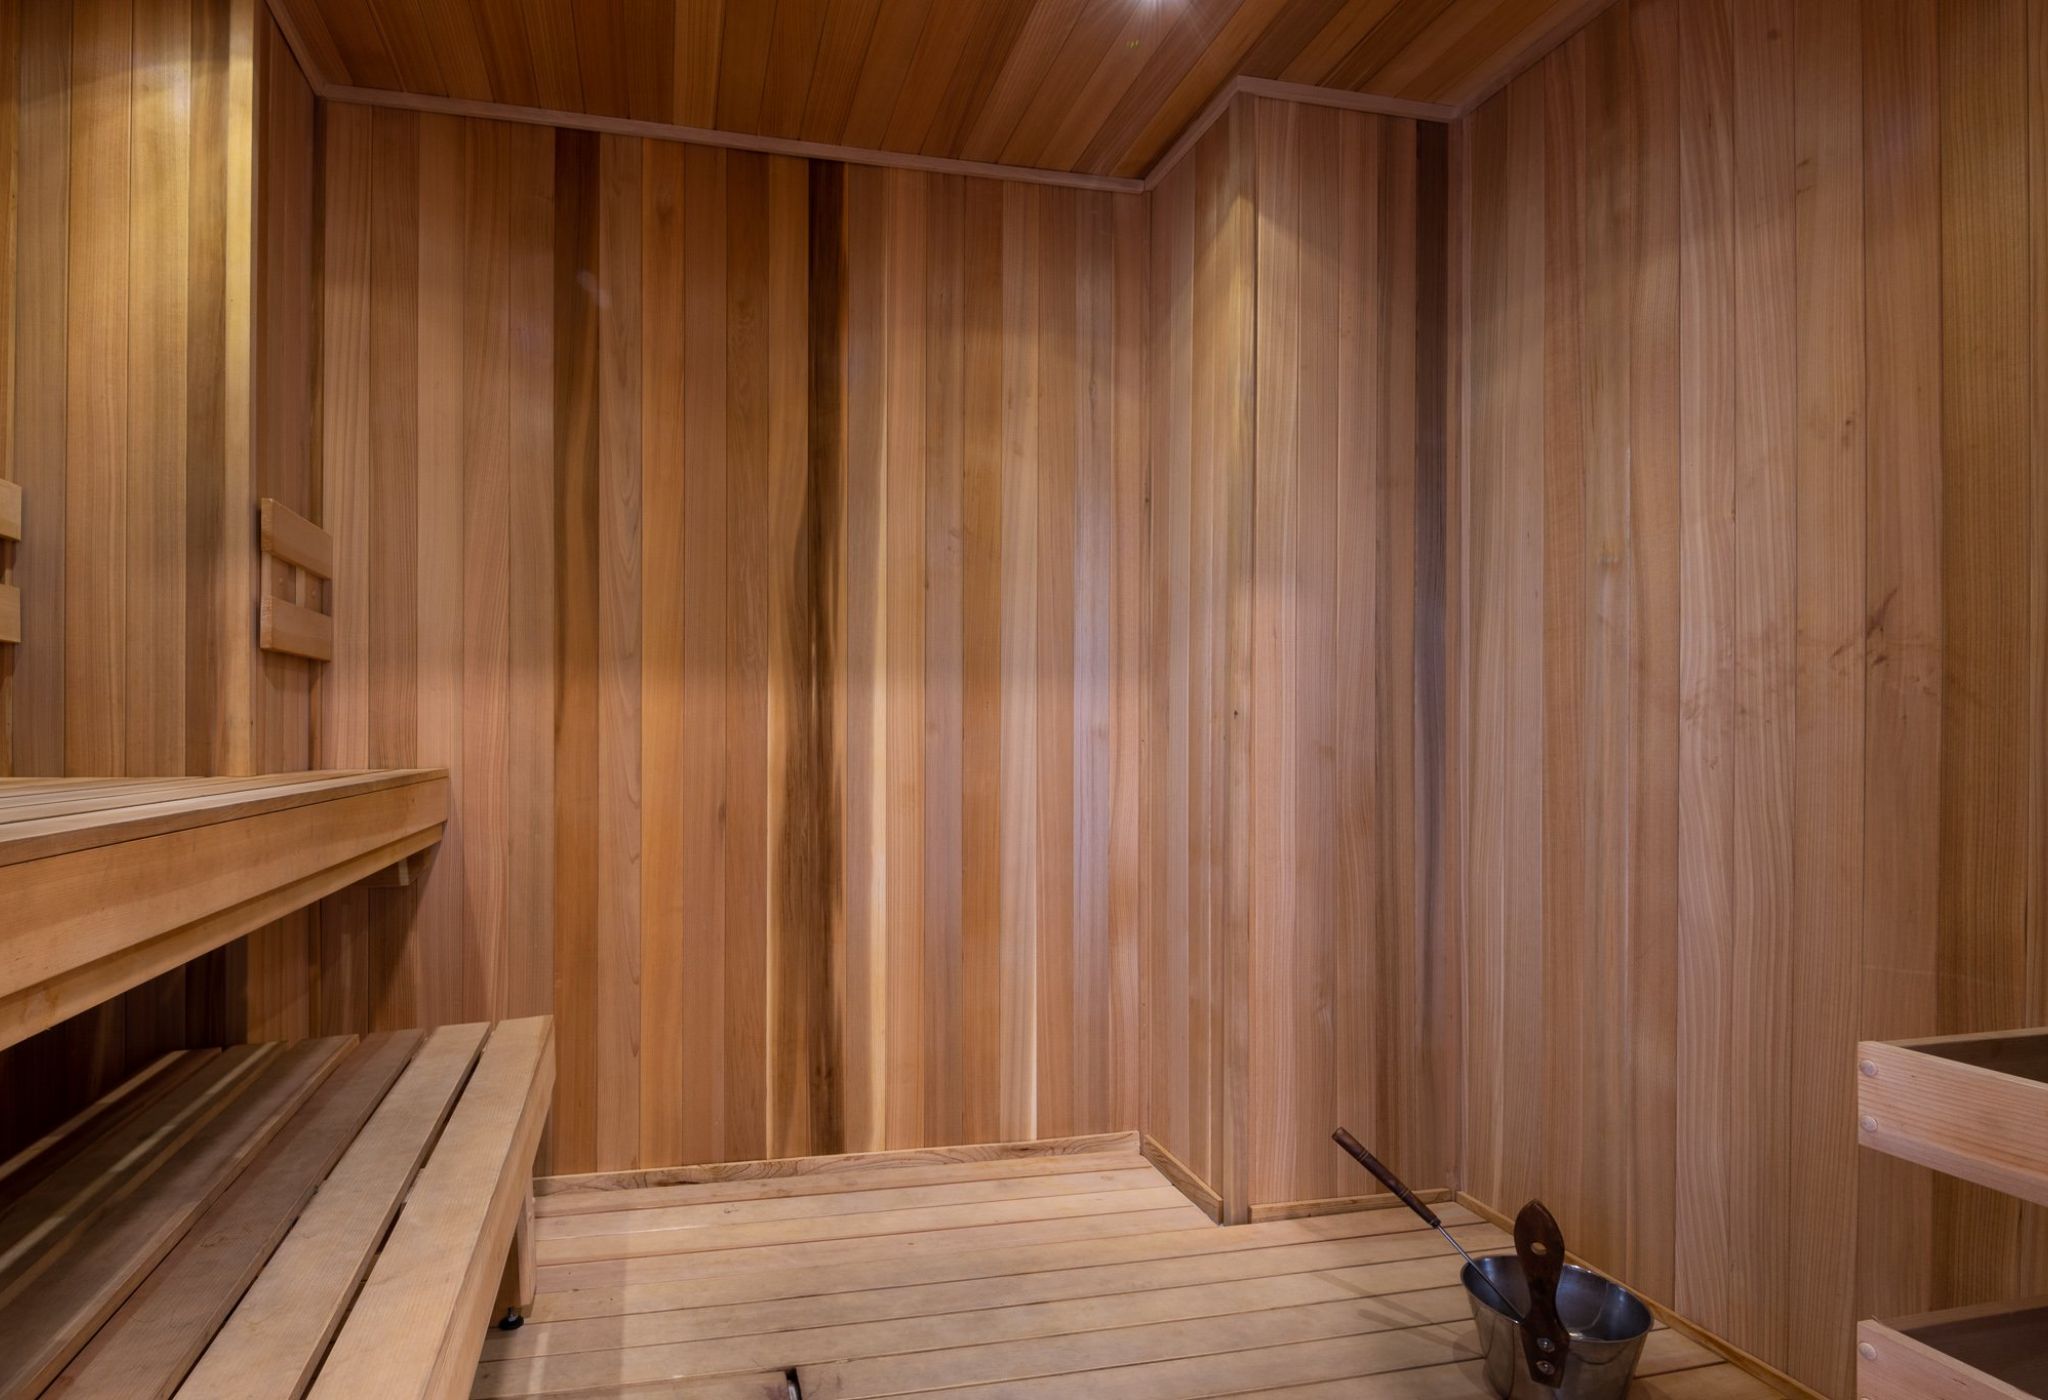 Sauna amenity with wood flooring, walls, and benches